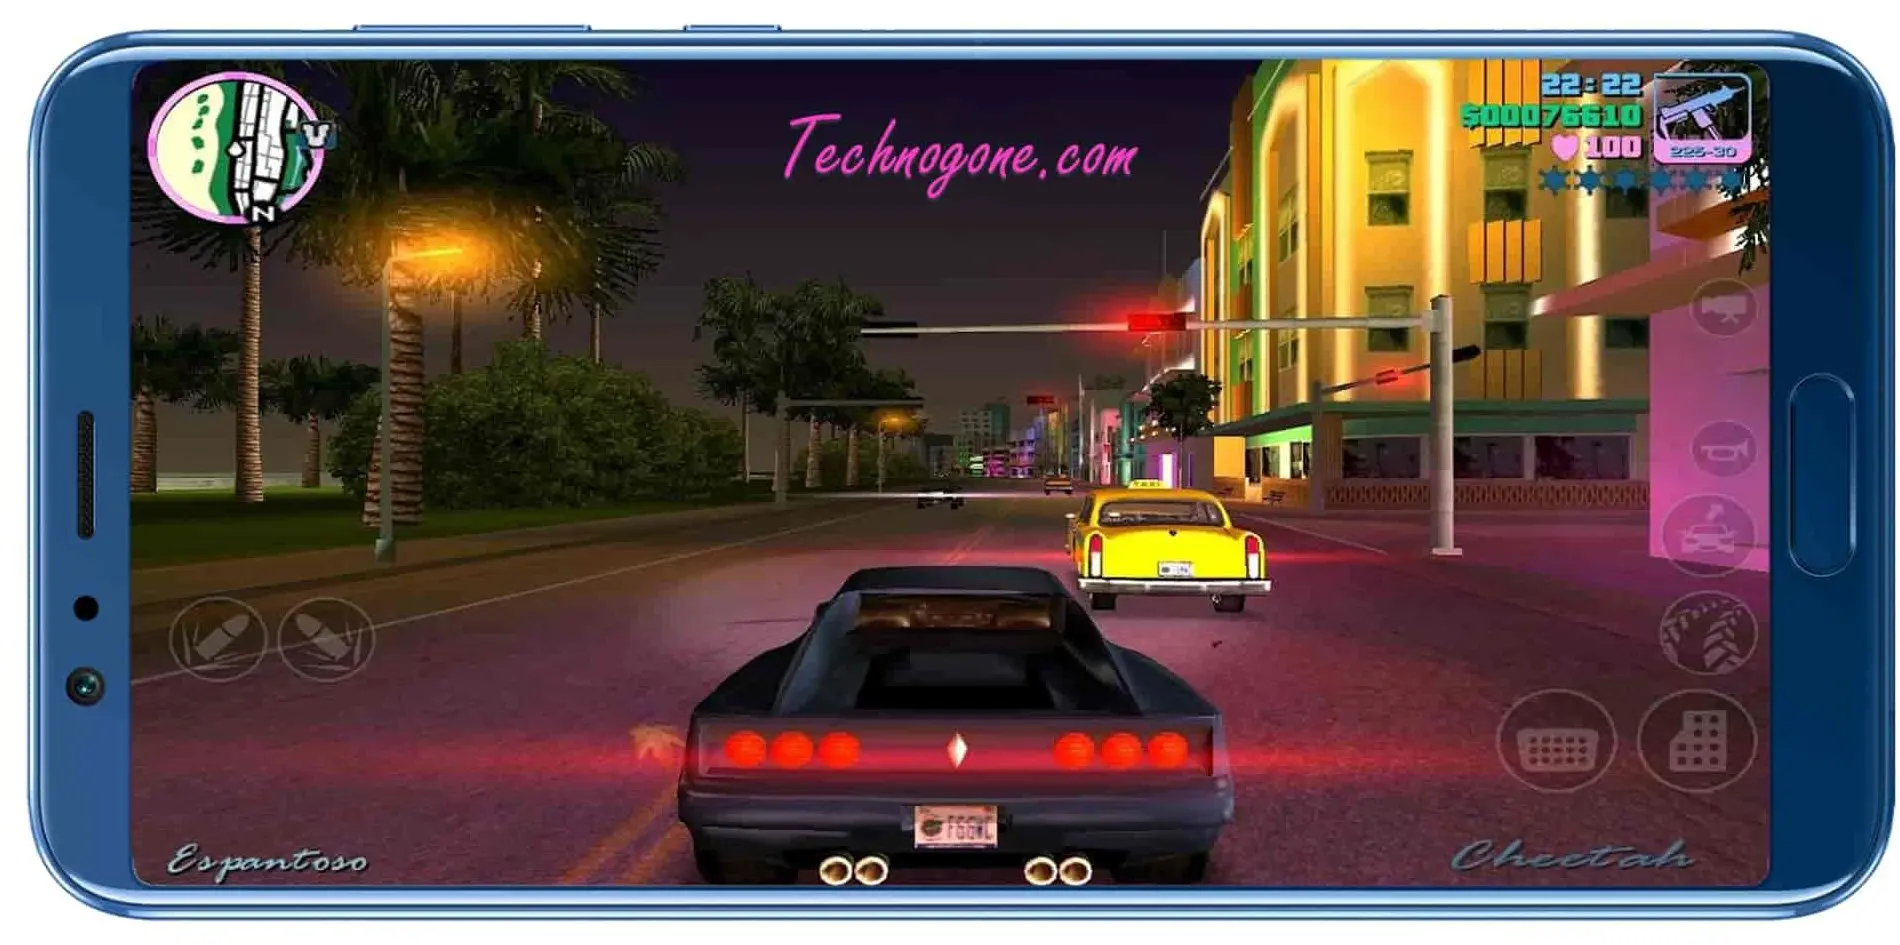 game gta vice city free download full game for computer